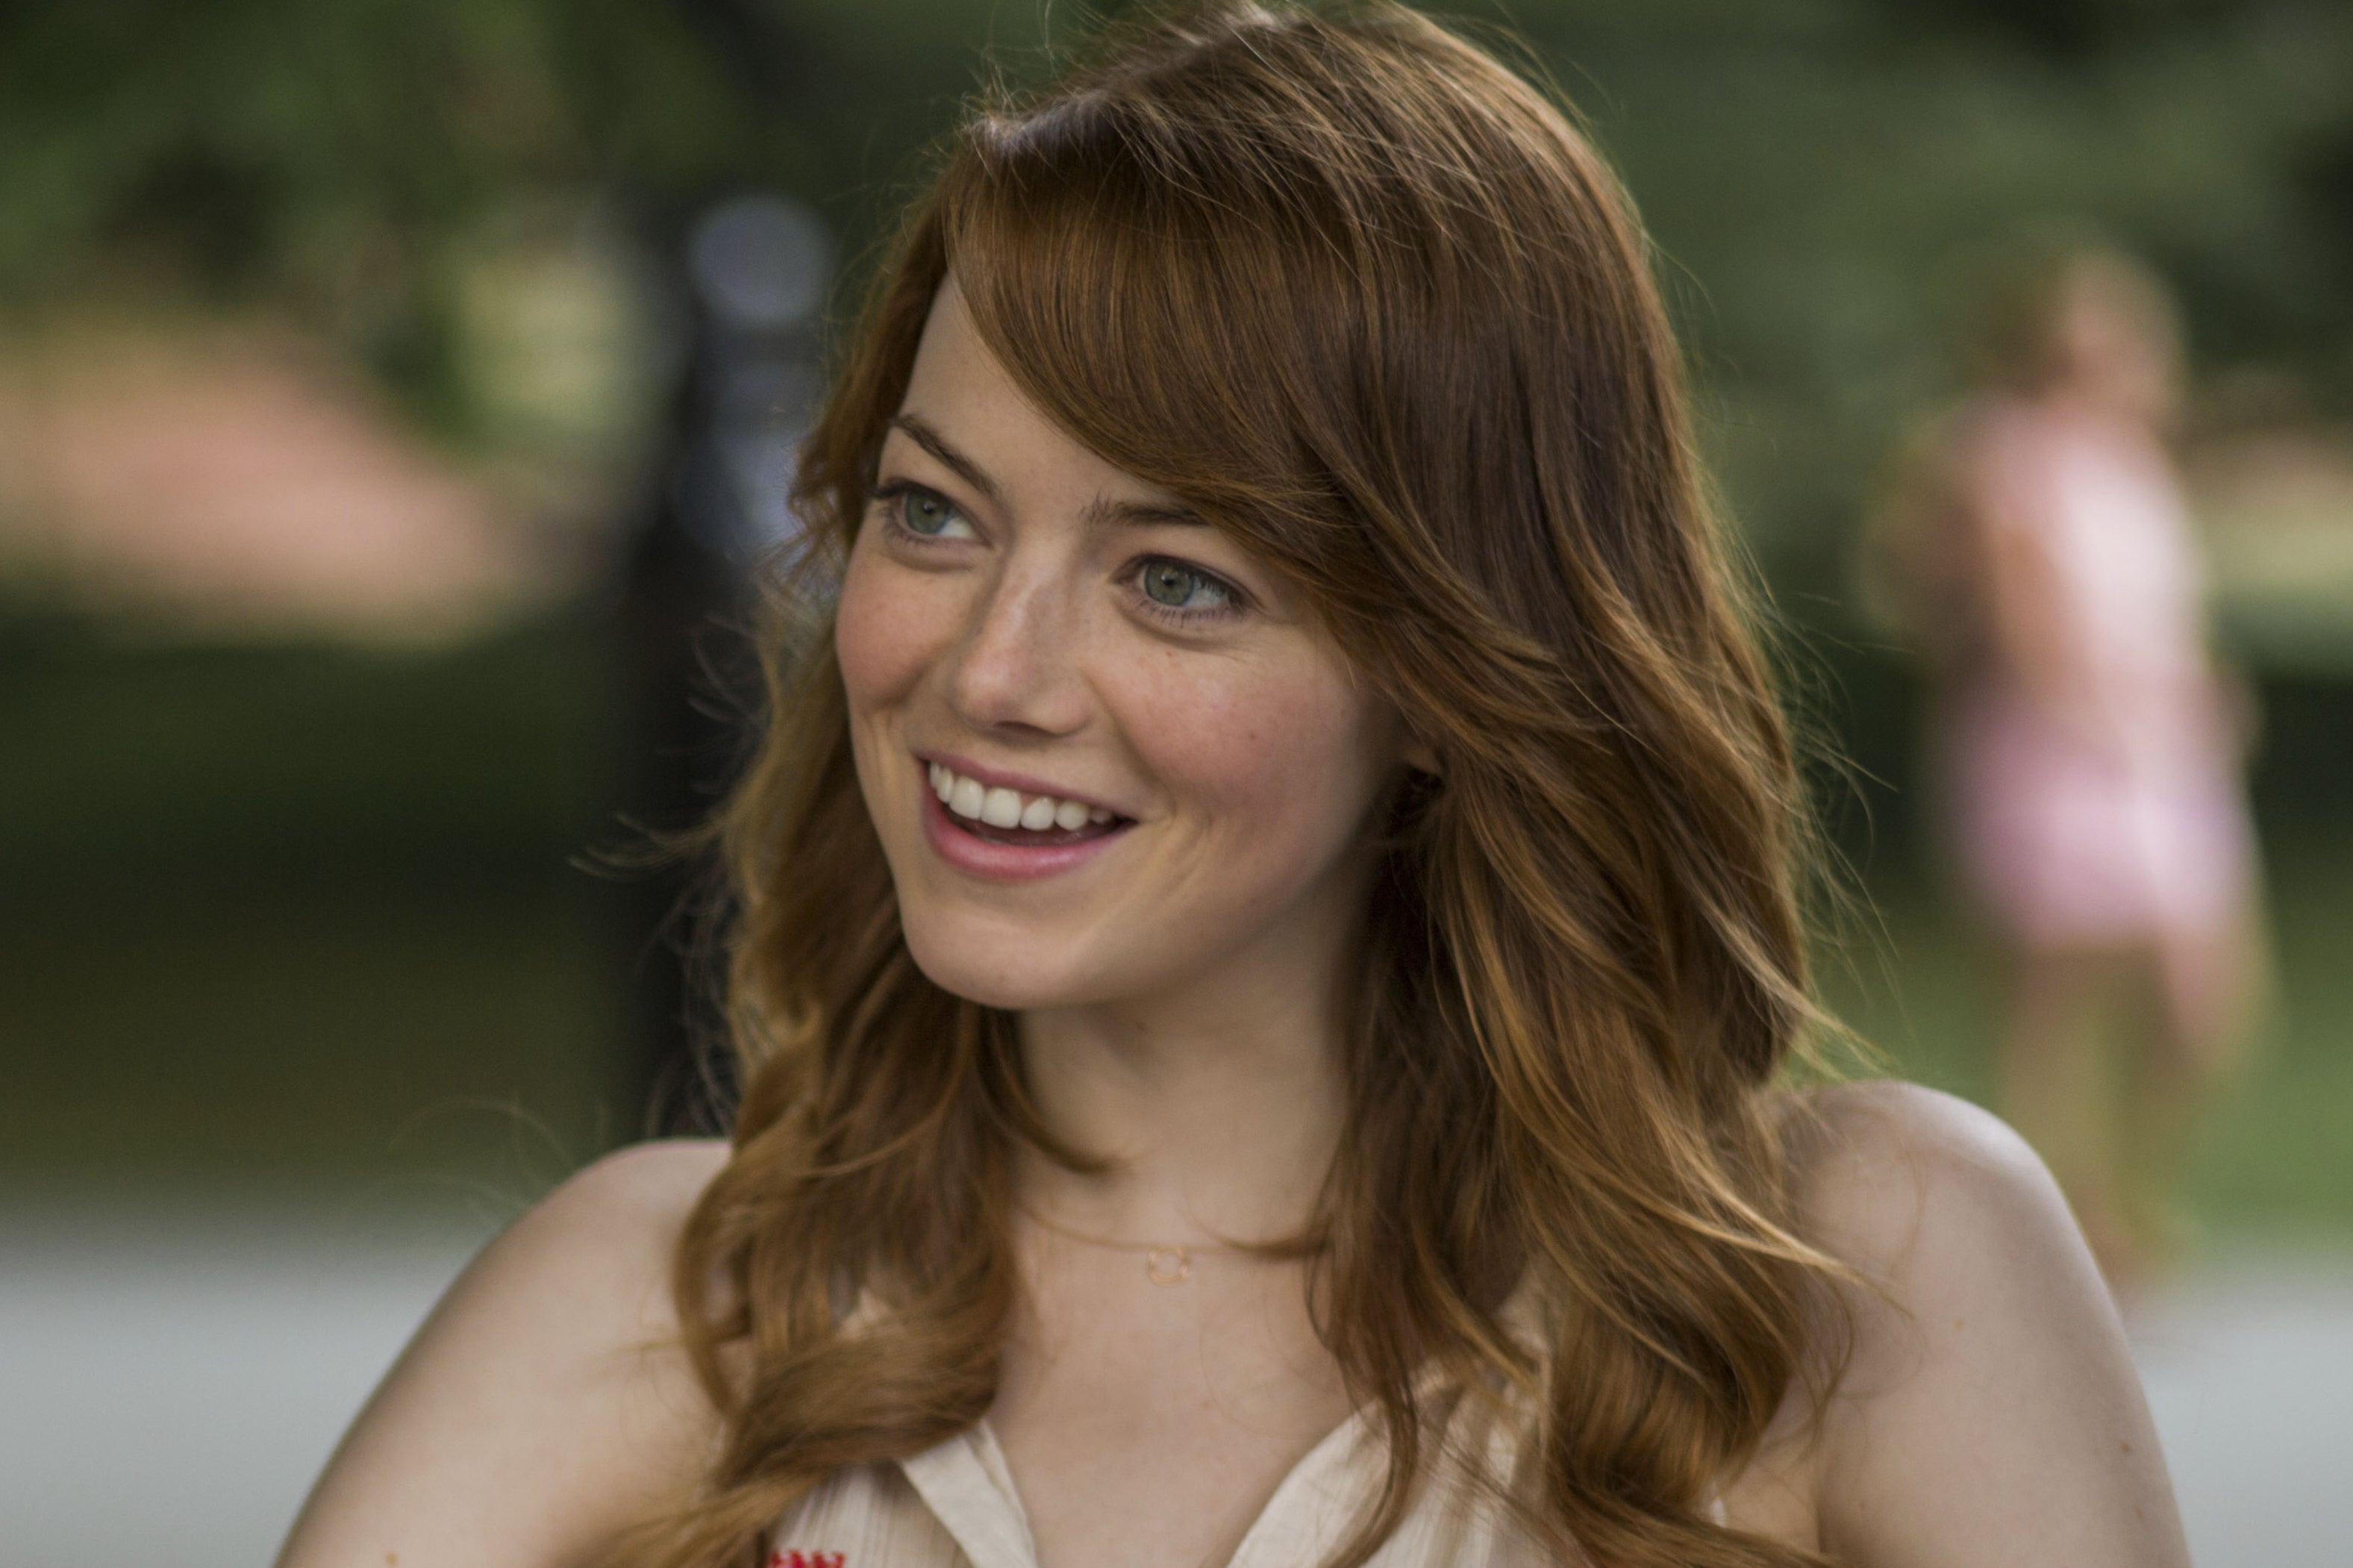 ‘She is one of those 100 per cent people. If she is into something, she is really into it’: Emma Stone in the 2015 Woody Allen film ‘Irrational Man’